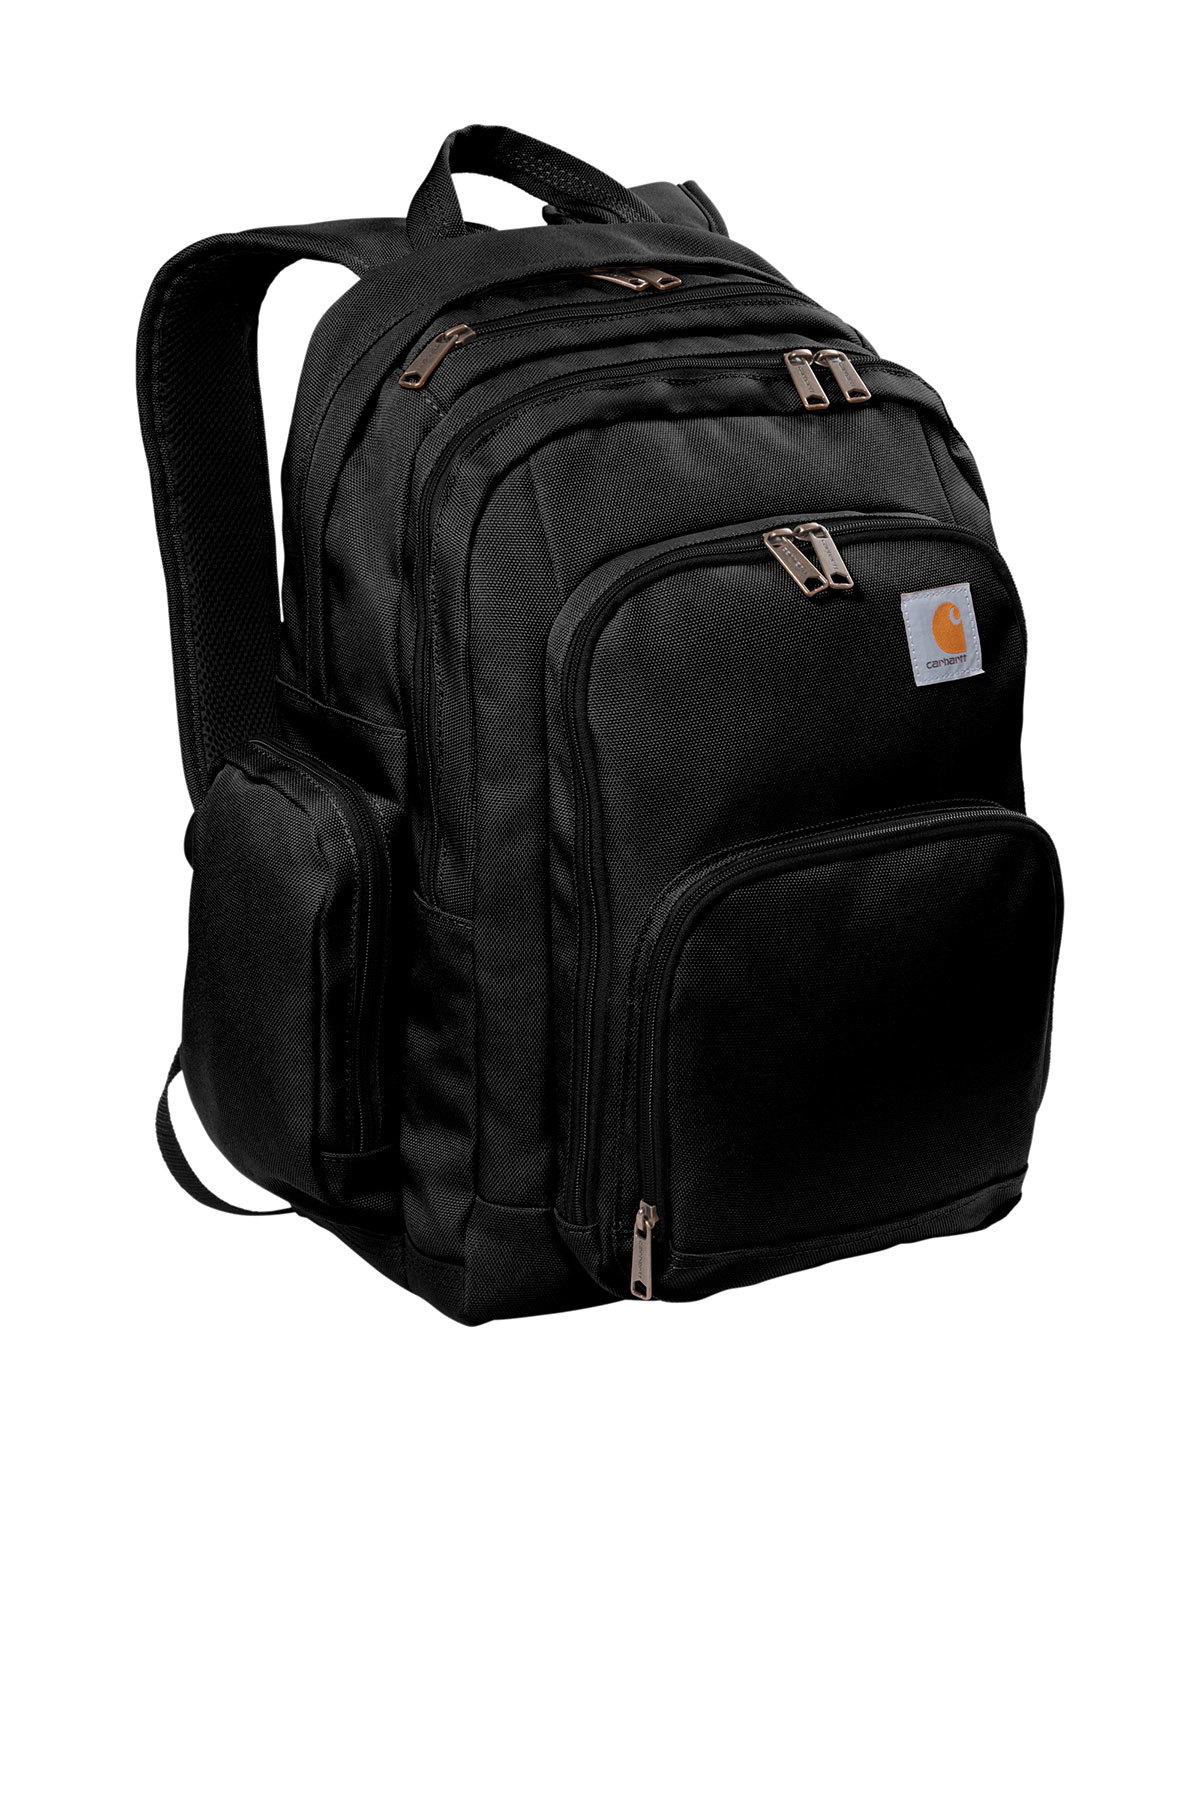 Carhartt Foundry Series Pro Backpack | Product | SanMar